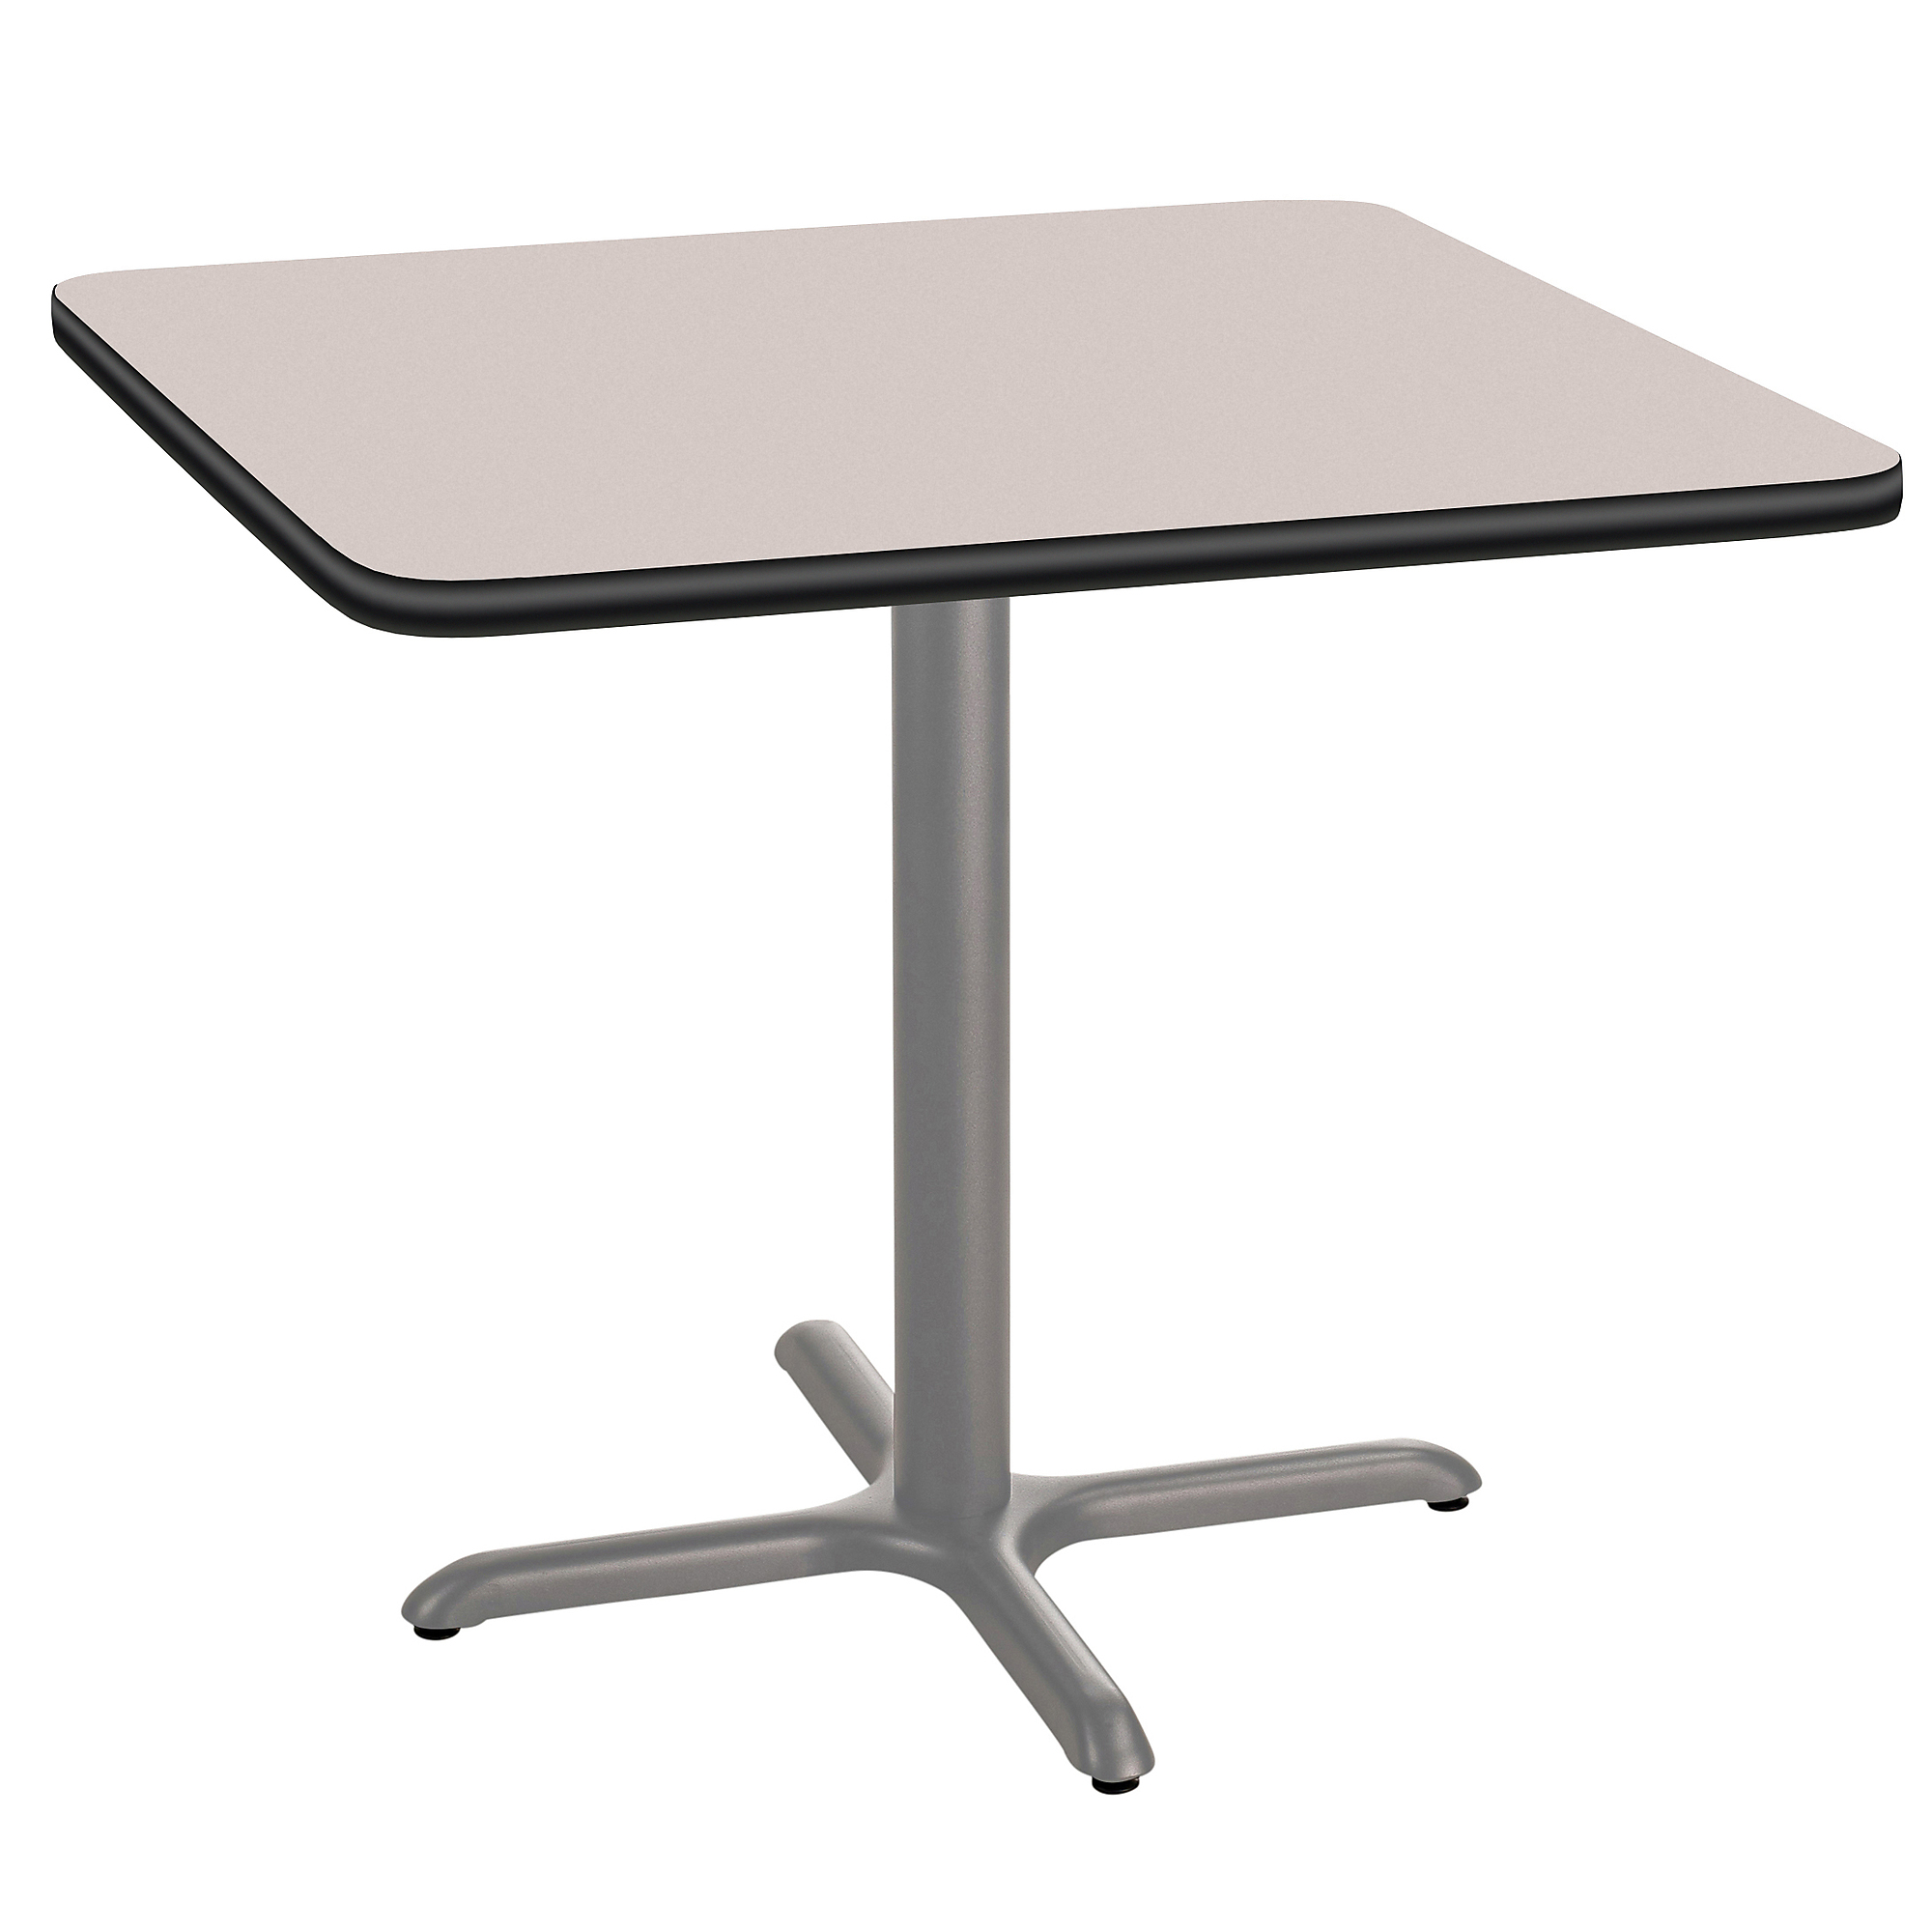 "National Public Seating, Cafe Table, 36x36x30 Square ""X"" Base, Height 30 in, Model CTG33636XDPBTMGY"